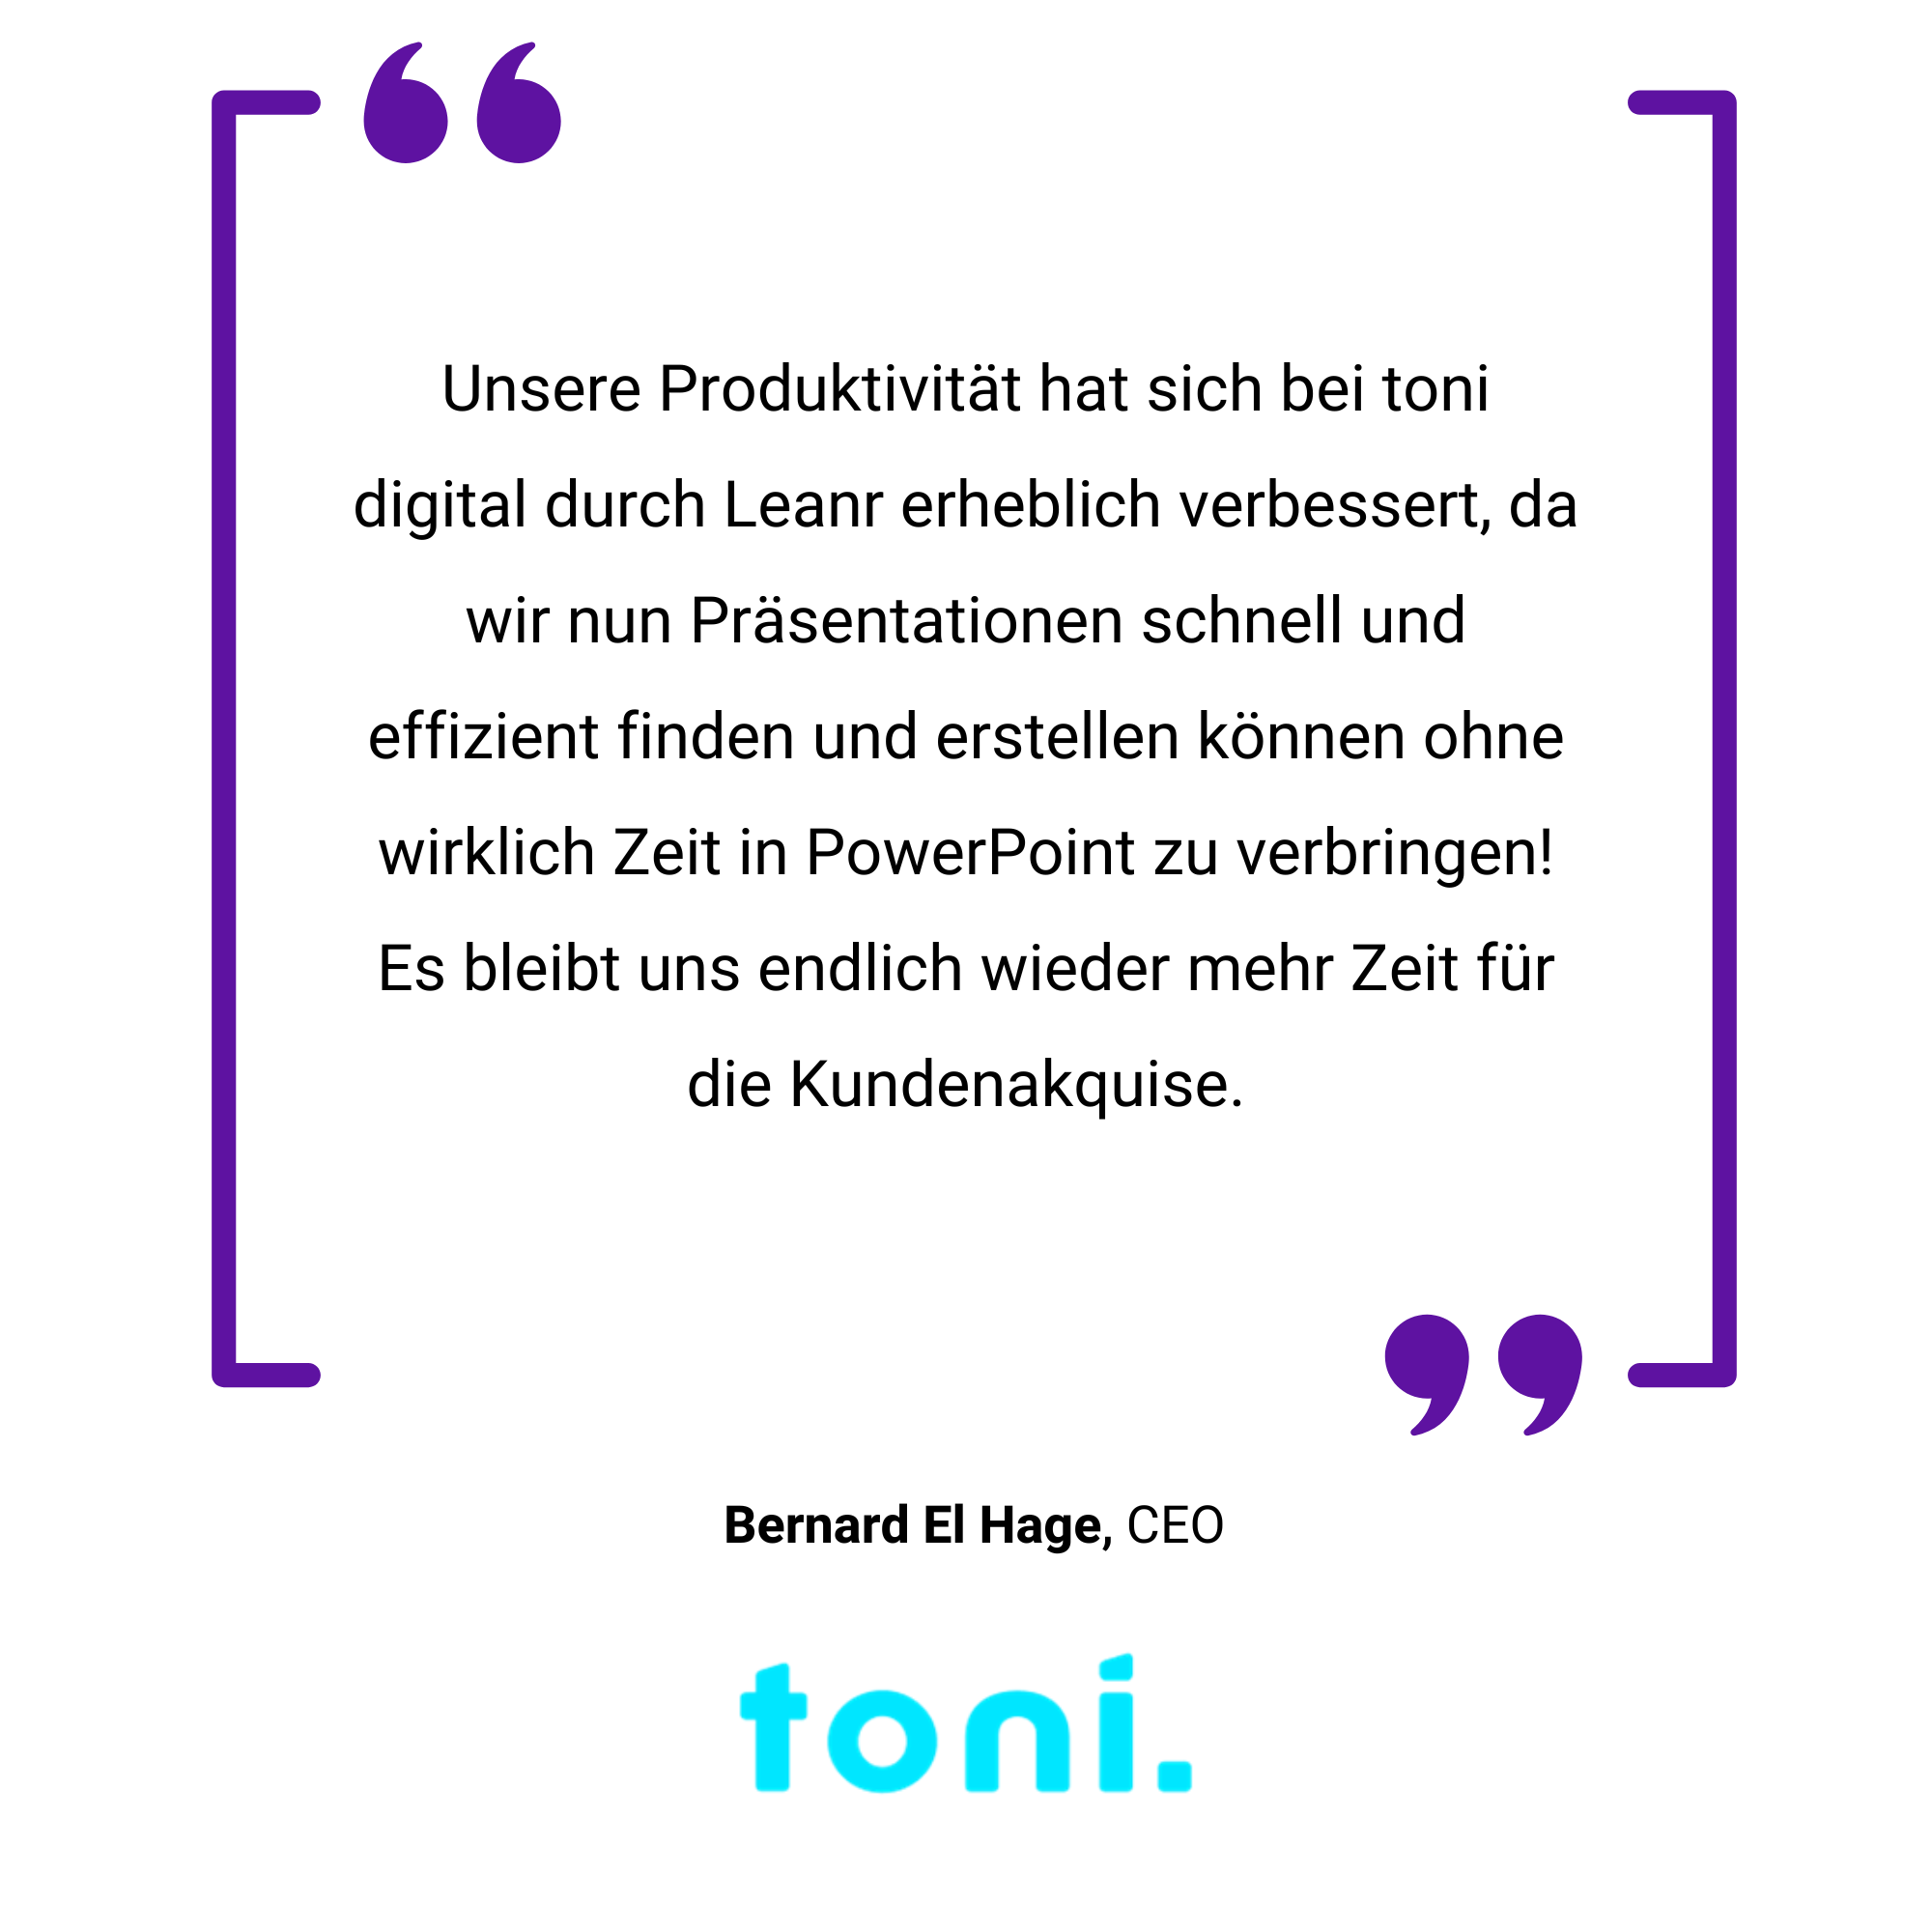 A square image featuring a testimonial by bernard eisenhagen for toni, with text in german inside a purple border.